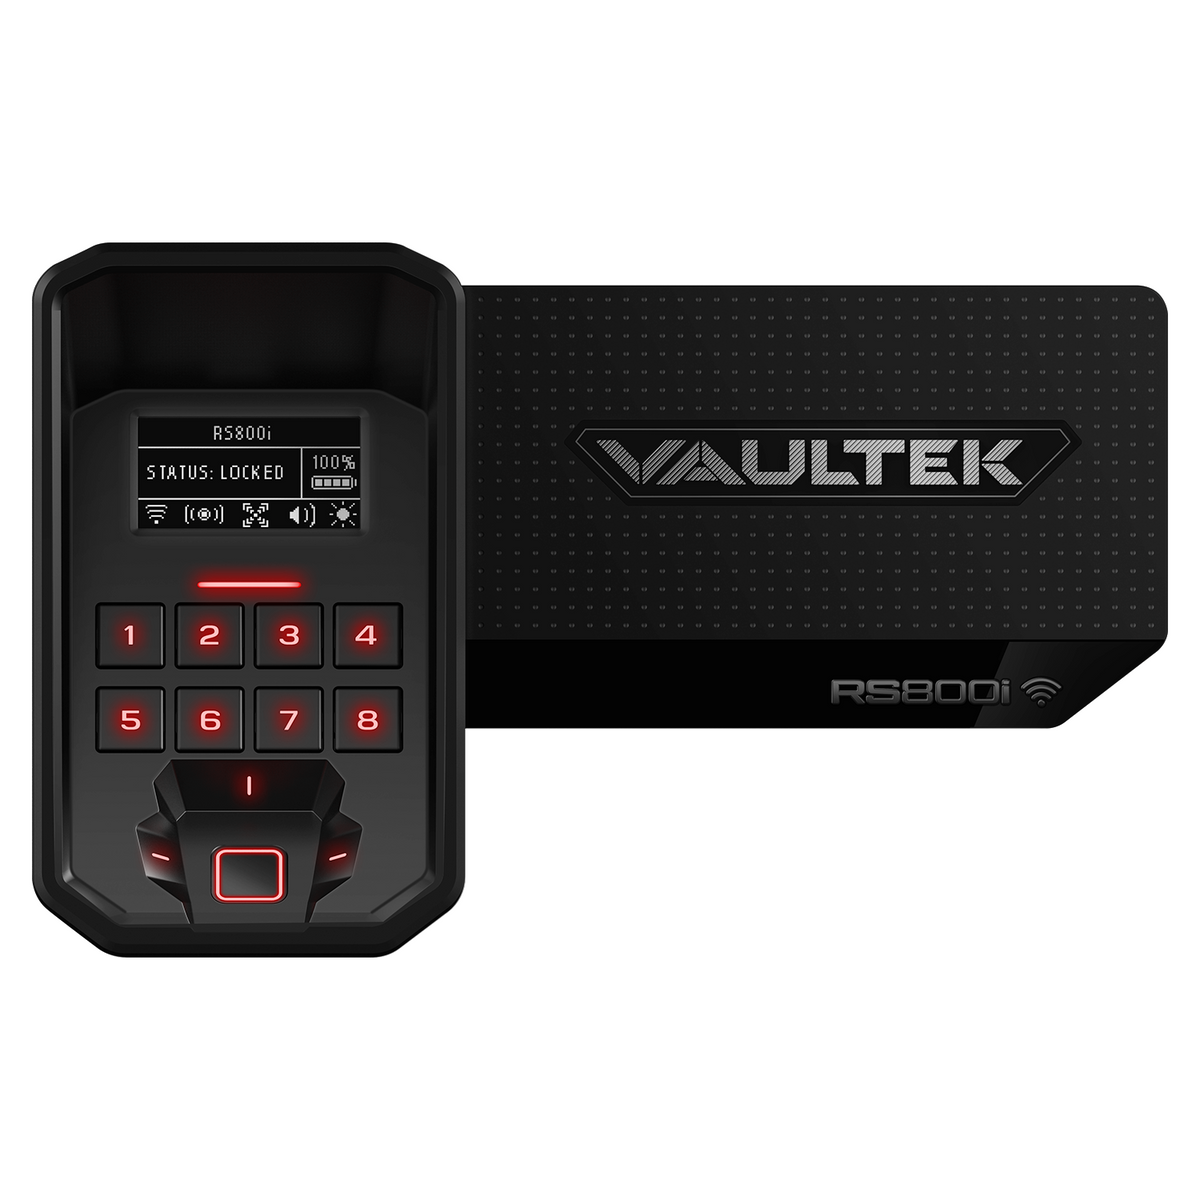 Vaultek -  RS800i Plus Edition Wi-Fi Biometric Smart Rifle Safe with Maxed Out Accessory Kit